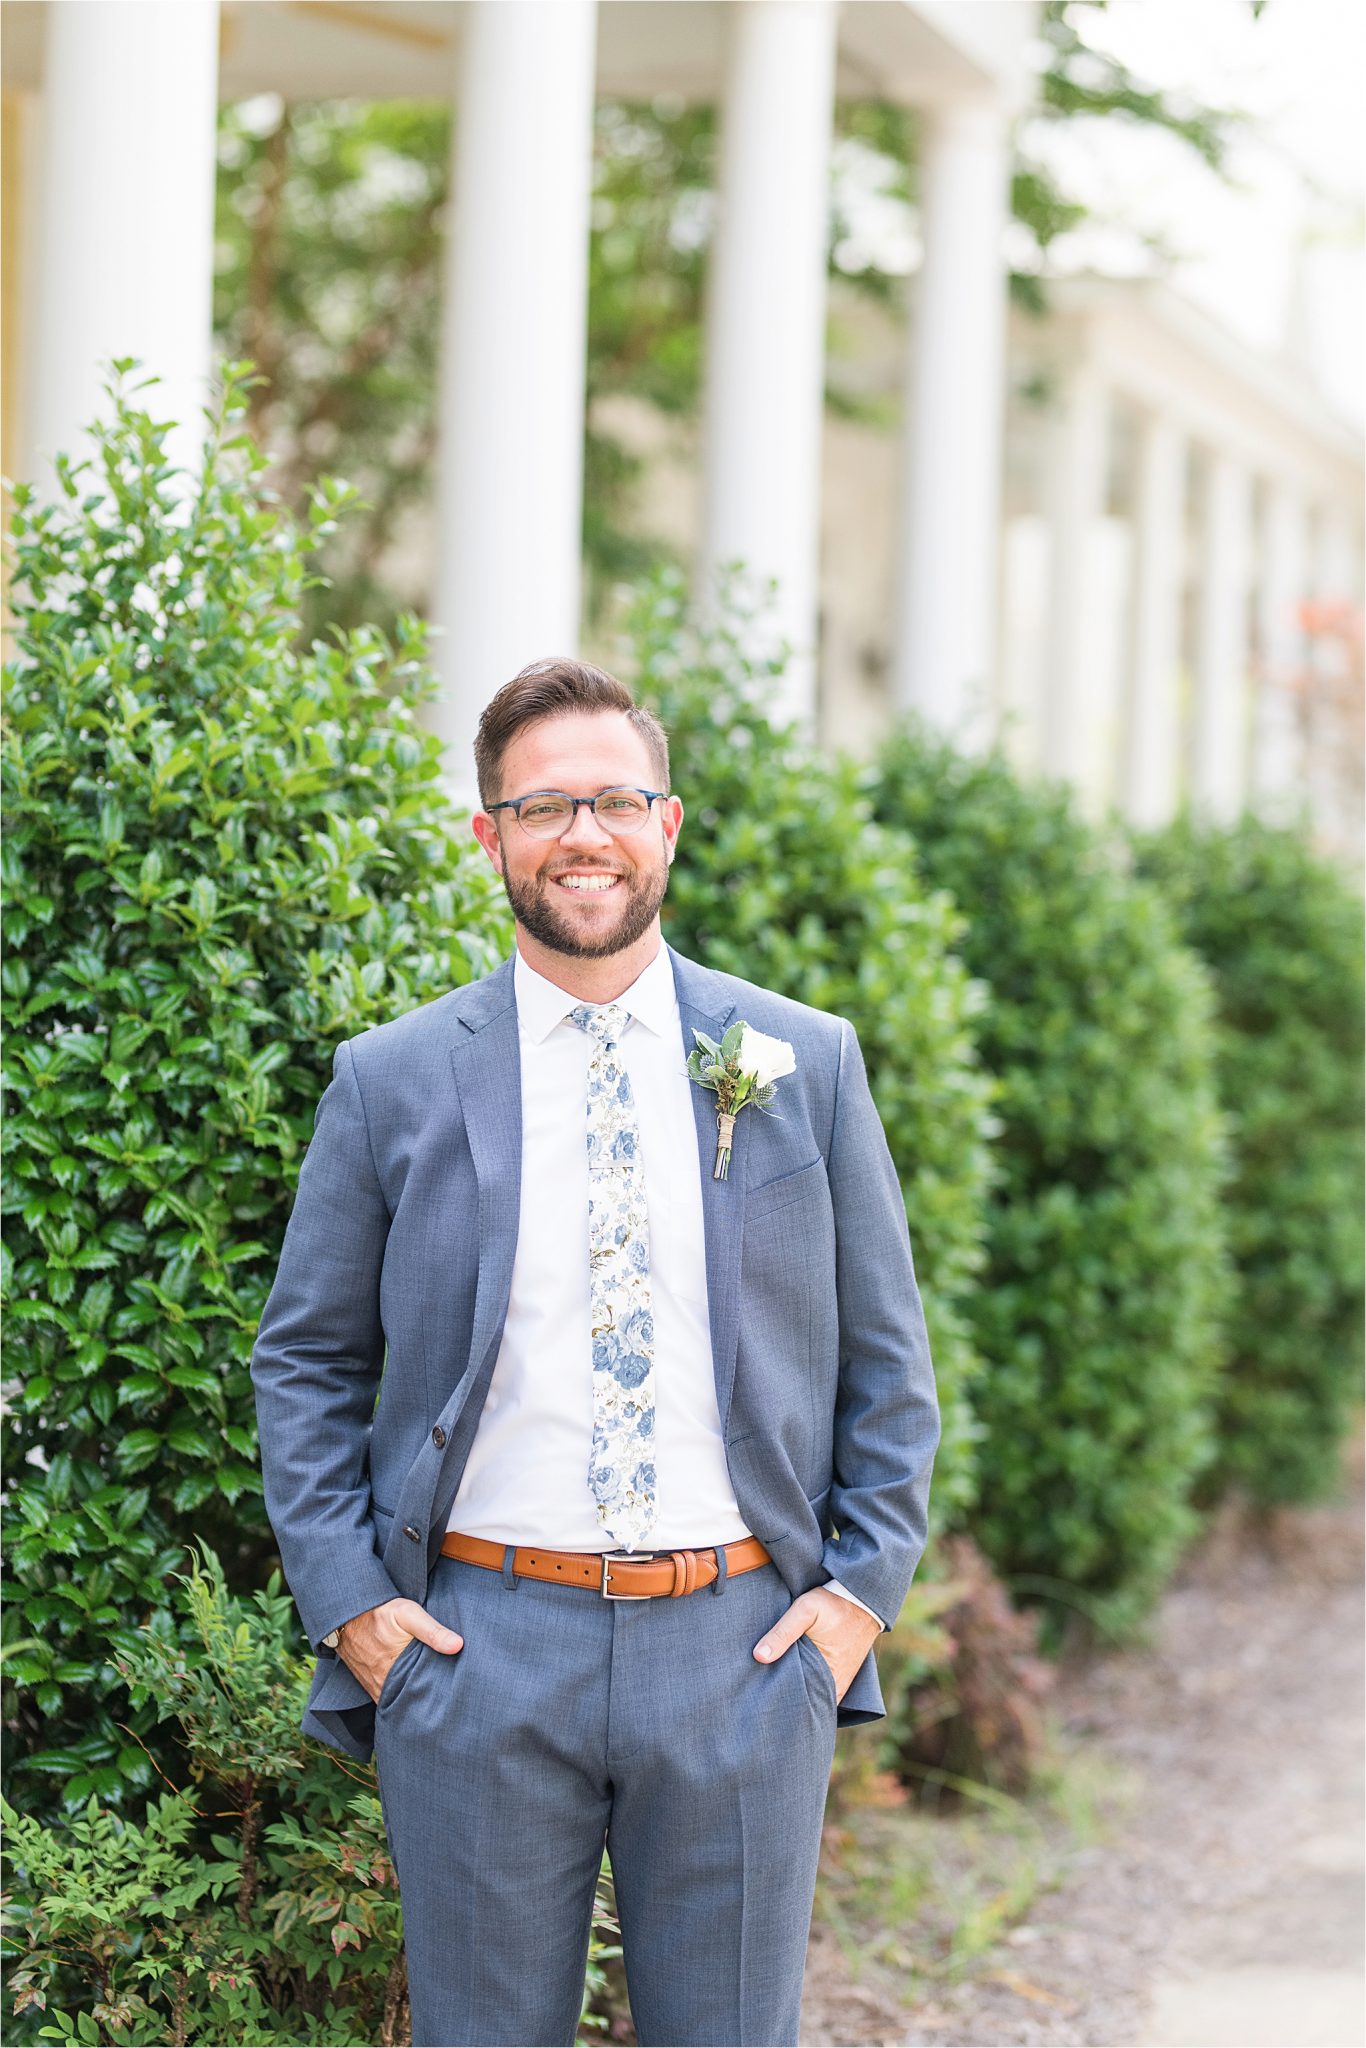 Pastel Themed Wedding-The Chapel at the Waters-Montgomery Alabama Photographer-Miles & Meredyth-Blue Themed Wedding-Groom's Tie-Groom Attire-White Boutonniere